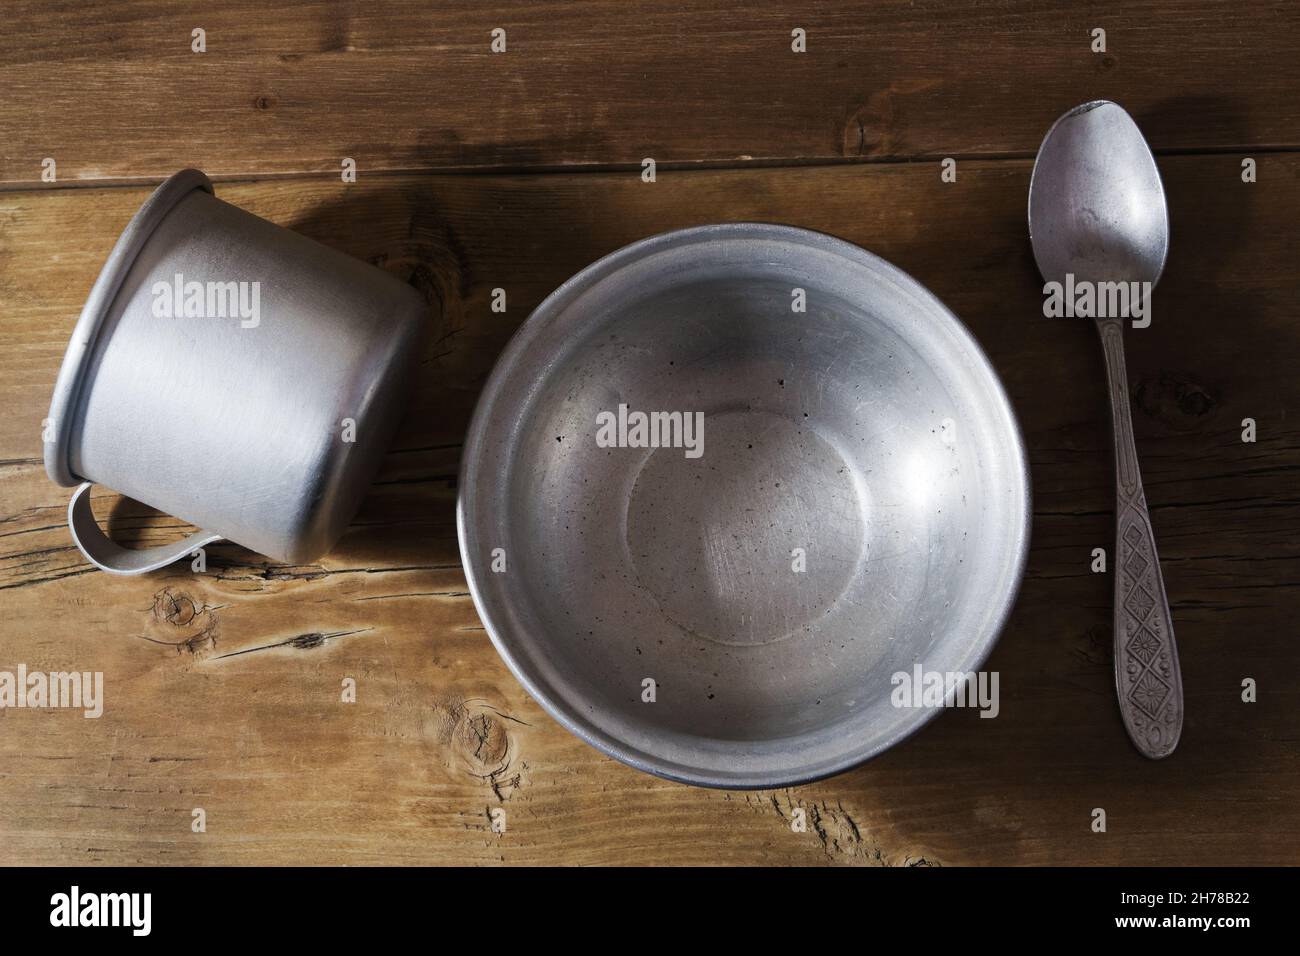 Empty aluminum dish, spoon and overturned mug on the old wooden table Stock Photo